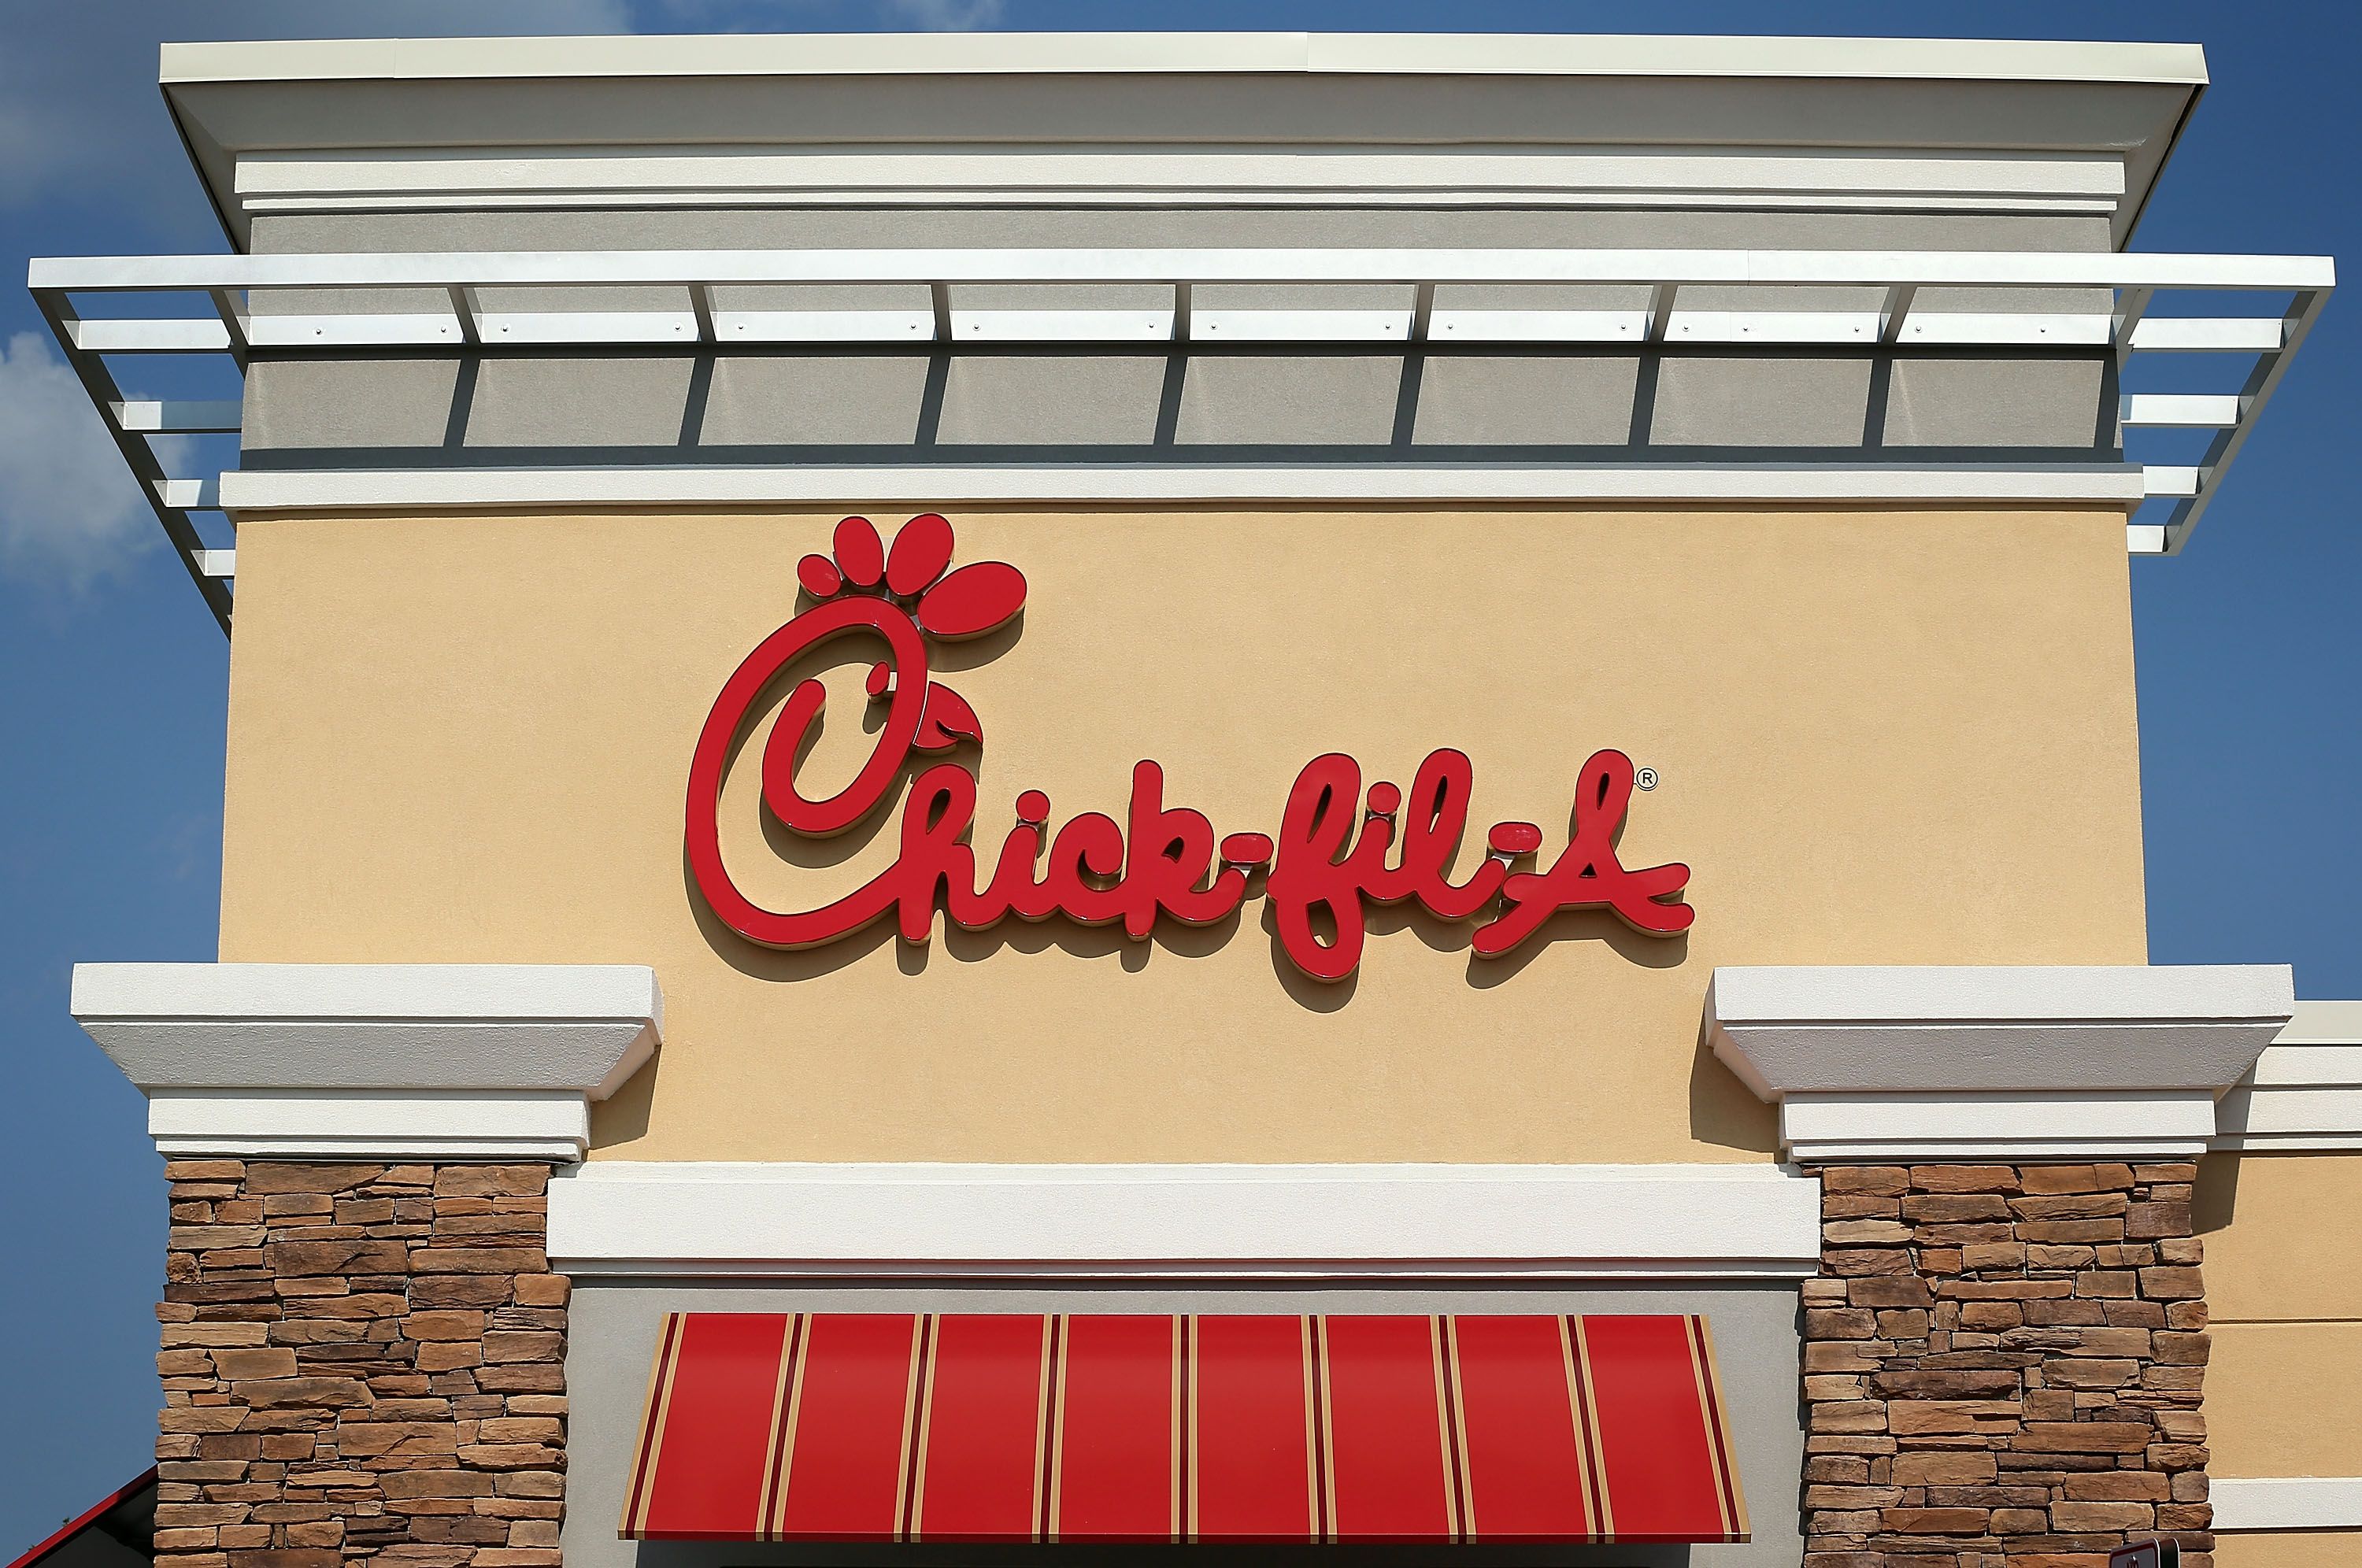 https://hips.hearstapps.com/hmg-prod/images/the-sign-of-a-chick-fil-a-is-seen-july-26-2012-in-news-photo-1701371227.jpg